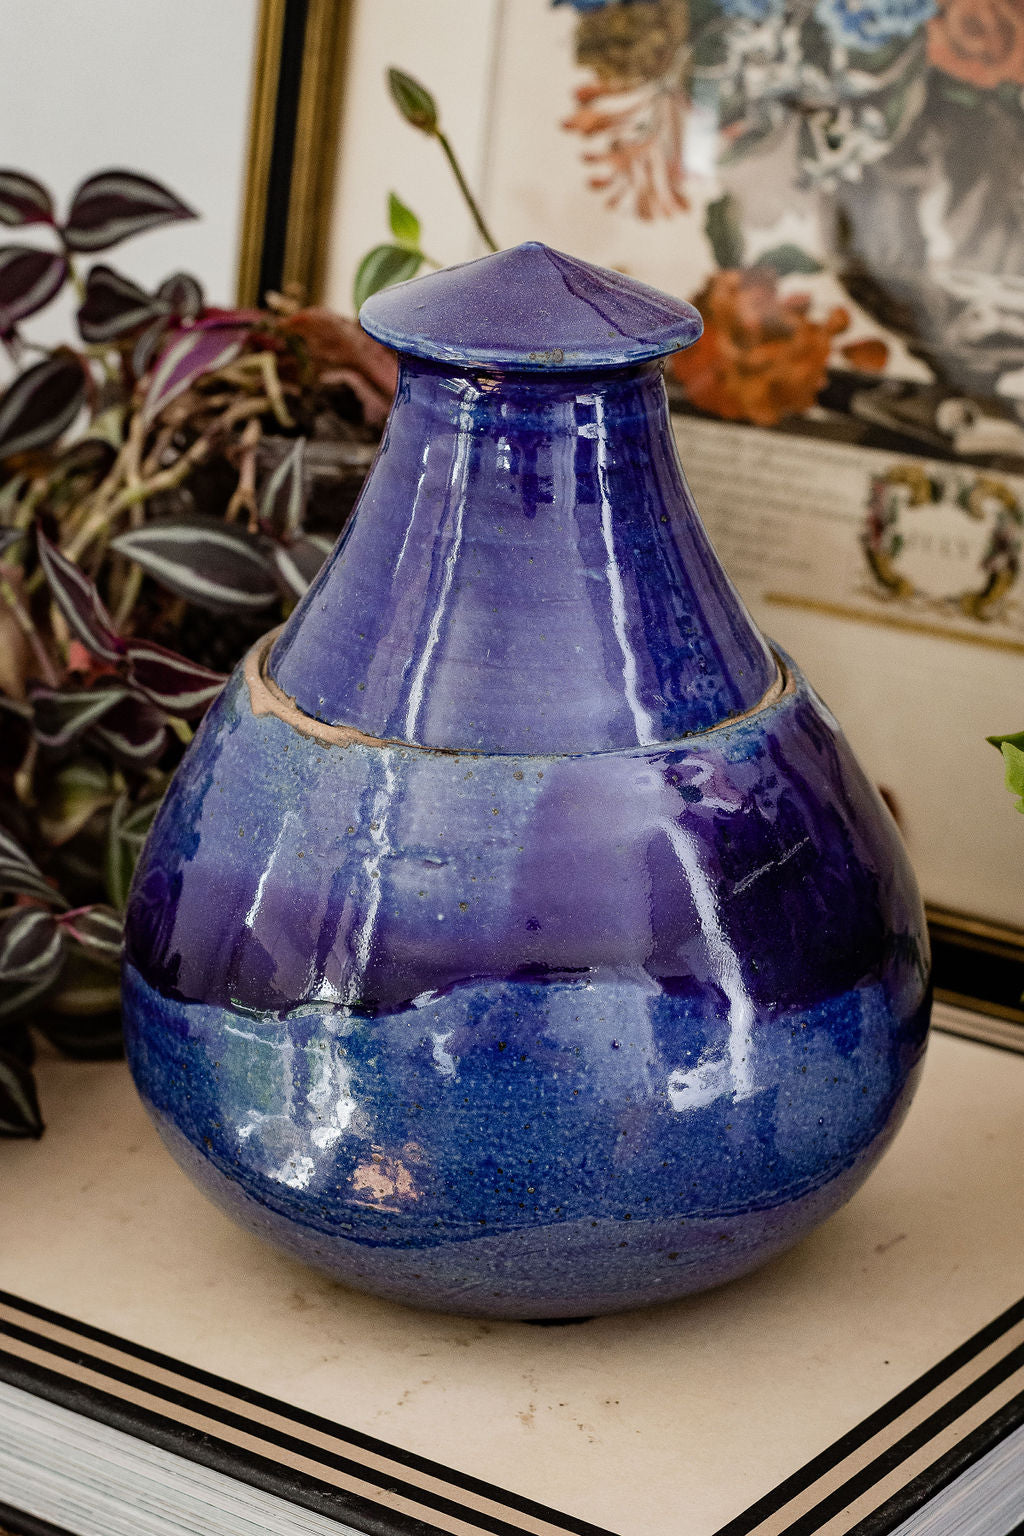 blue pottery volcano glazed MCM mid-century modern highest quality products small business woman-owned ethical fragrance small batch floral citrus unique relic vessel luxury vintage rare candle non-toxic safe non-carcinogenic vegan wax apricot coco coconut special gift ethical home decor recycled reuse repurpose eco friendly heirloom